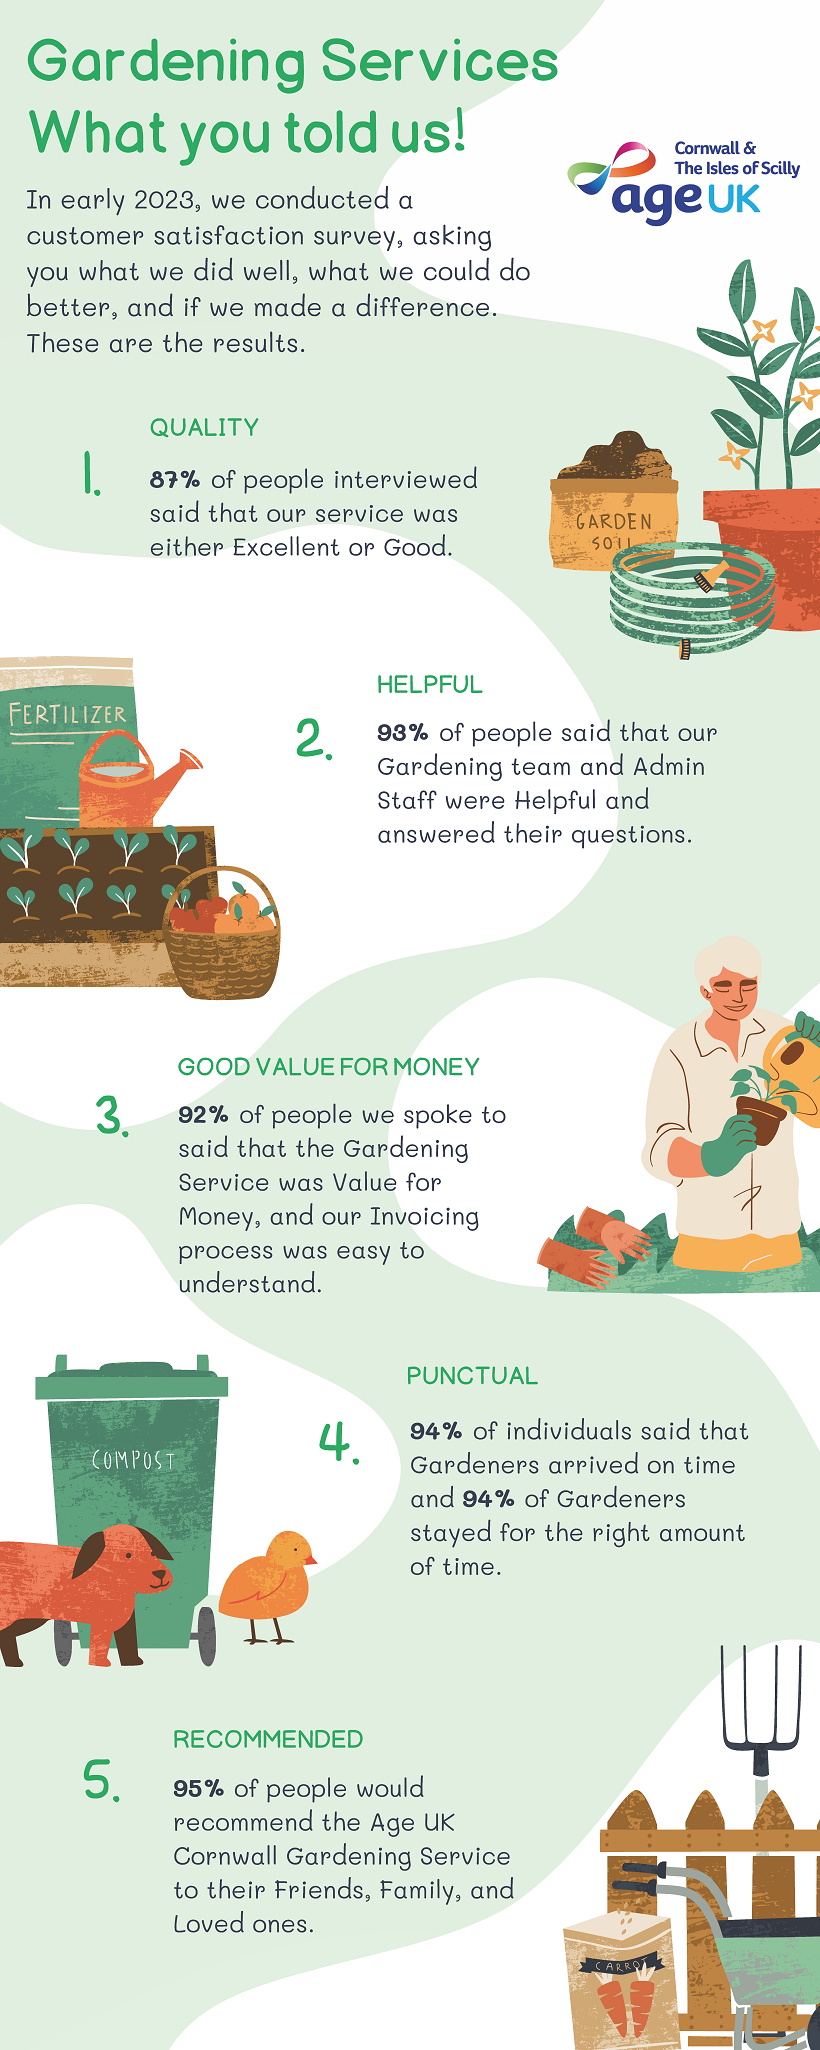 What you told us - Quality & Satisfaction Survey - Gardening Services 2023.png